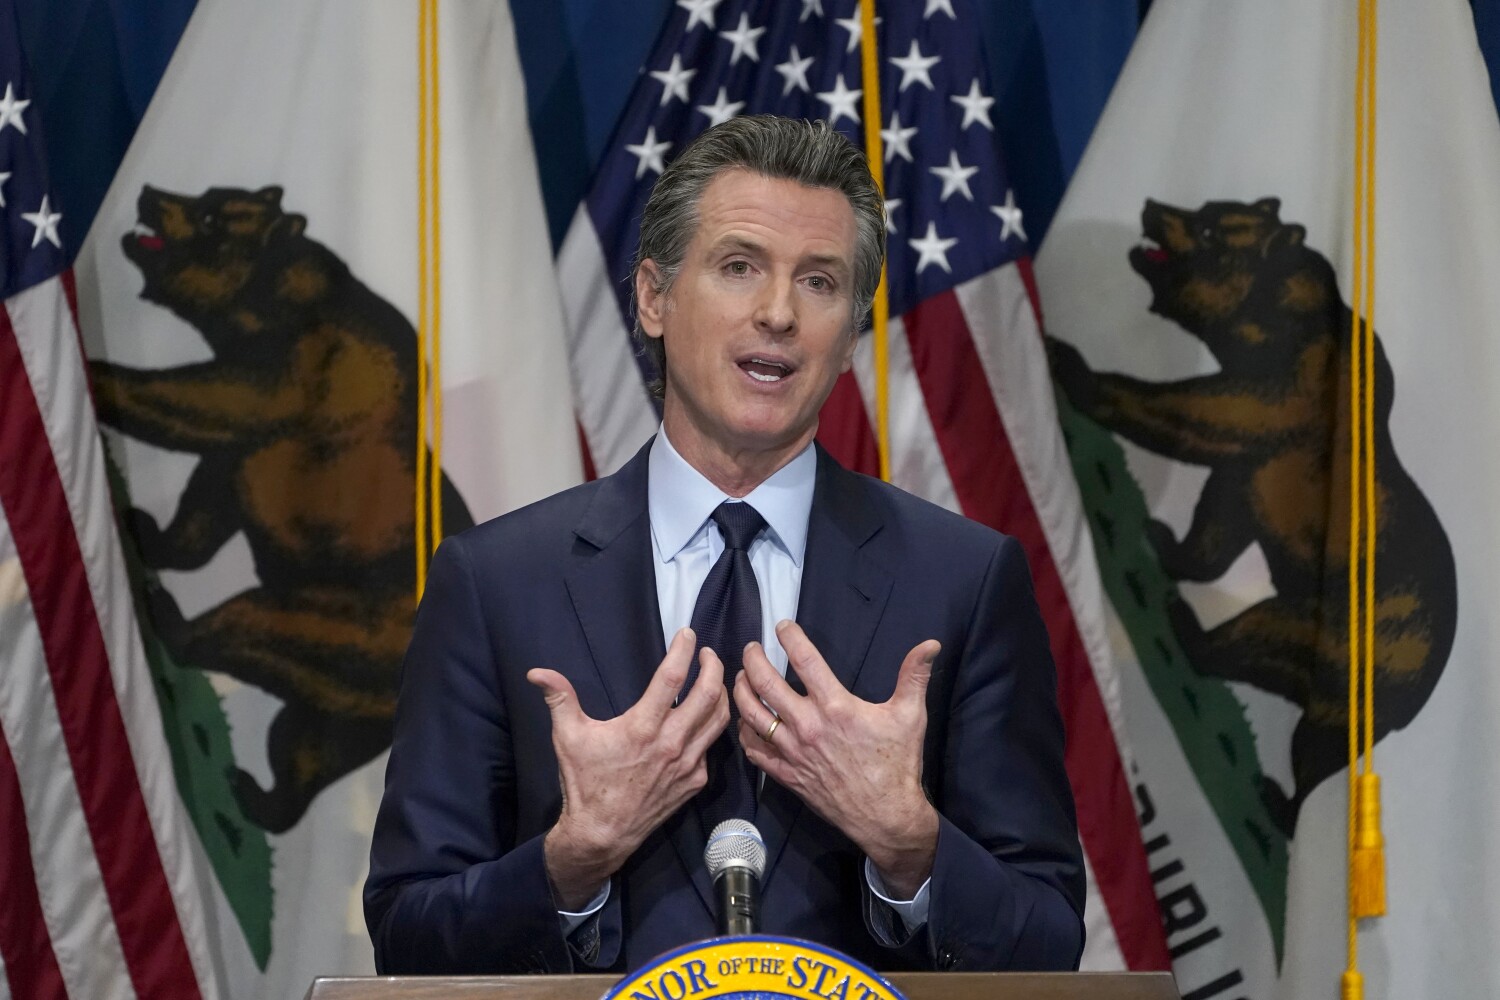 Effort to recall Newsom inches closer to triggering election, with 1.2 million signatures validated